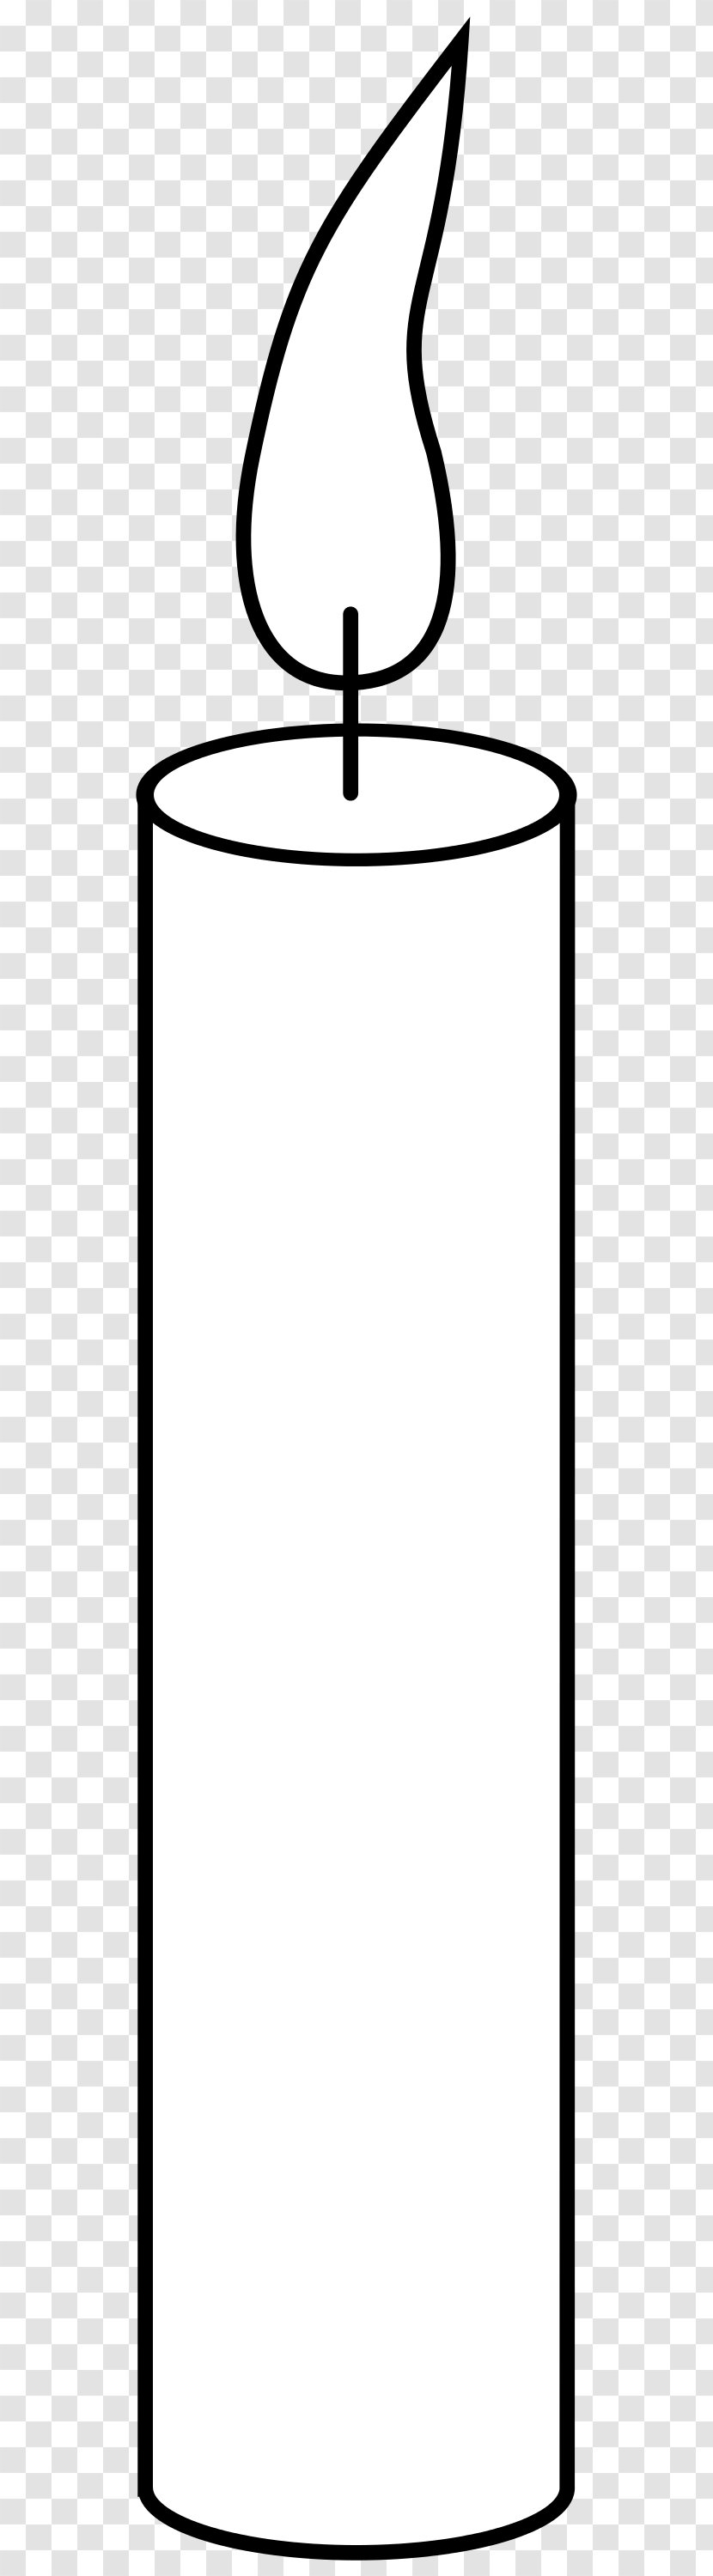 Black And White Line Art Clip - Candle Transparent PNG